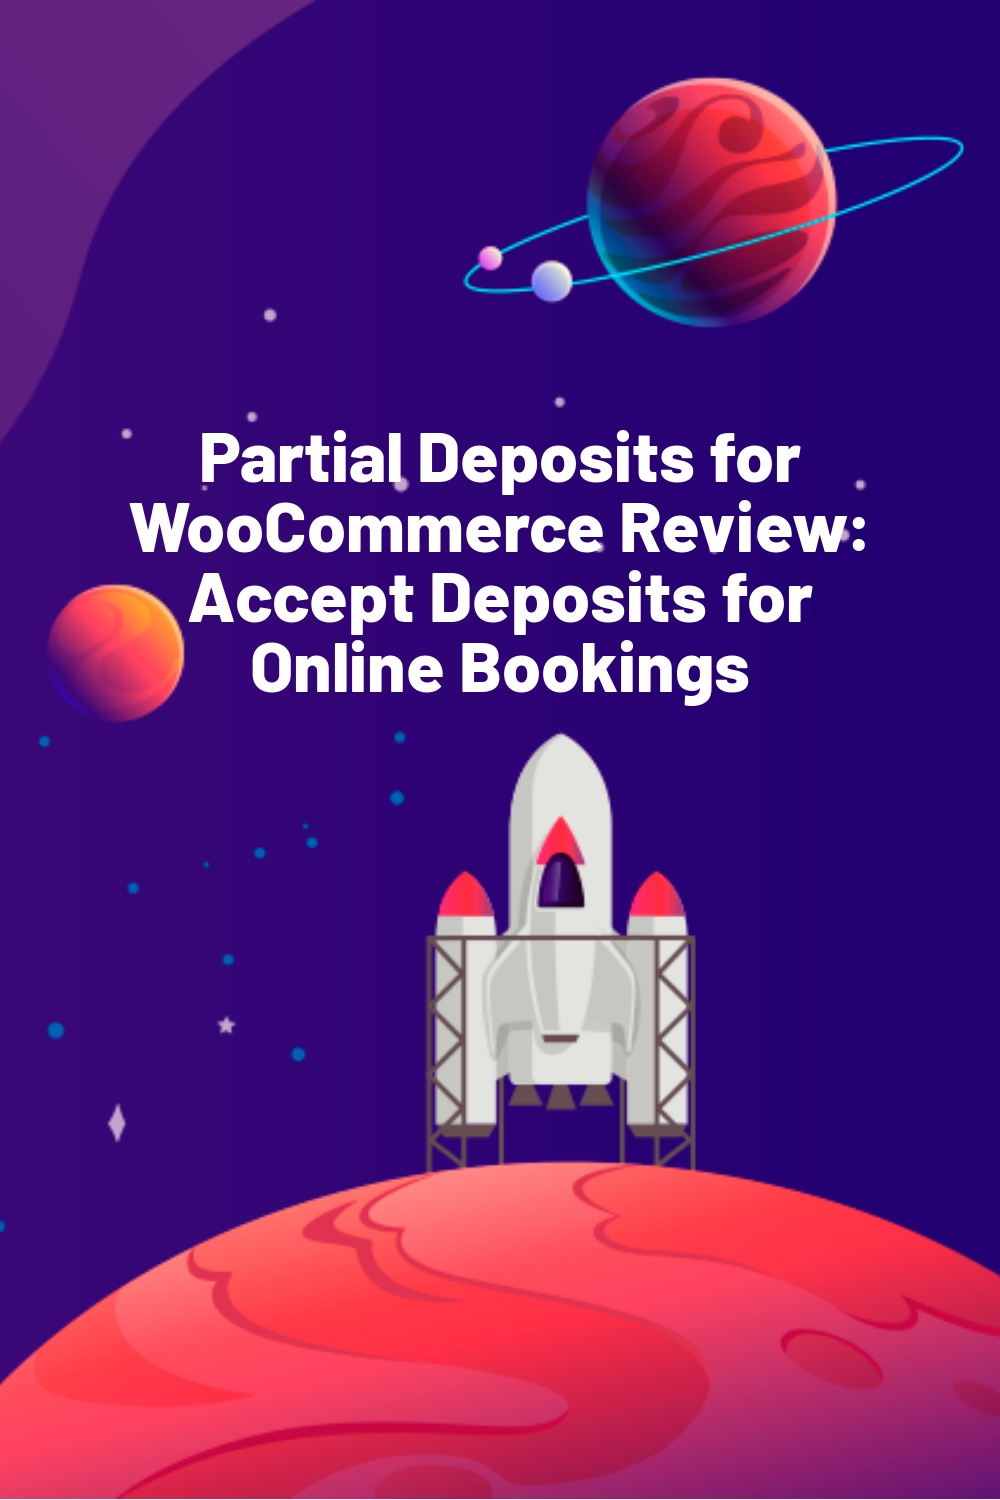 Partial Deposits for WooCommerce Review: Accept Deposits for Online Bookings